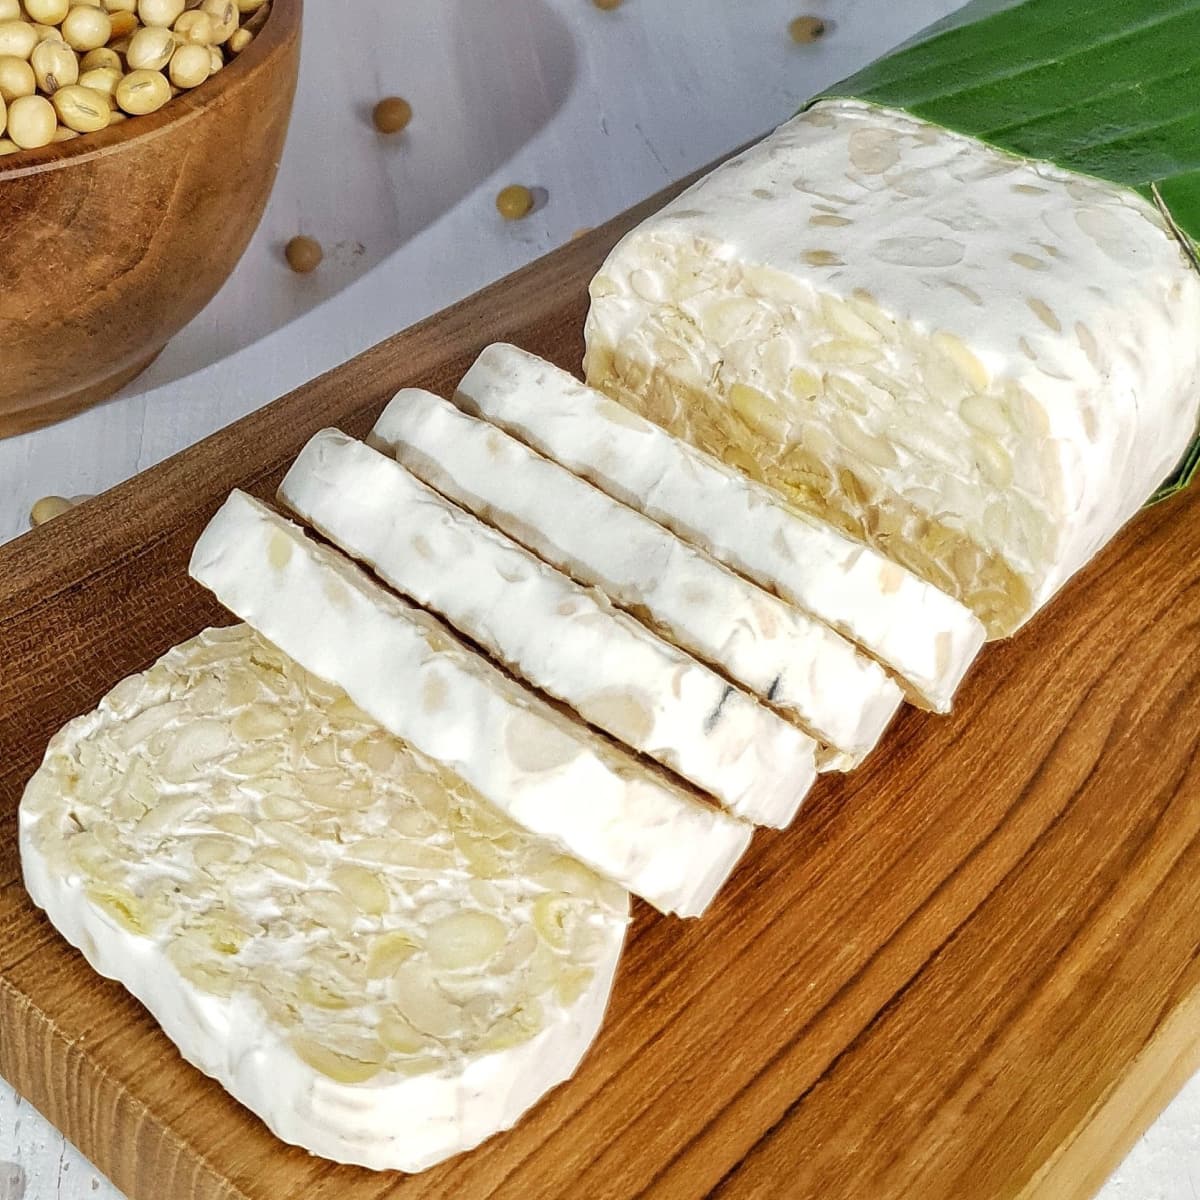 Slices of Tempeh on a Wooden Board